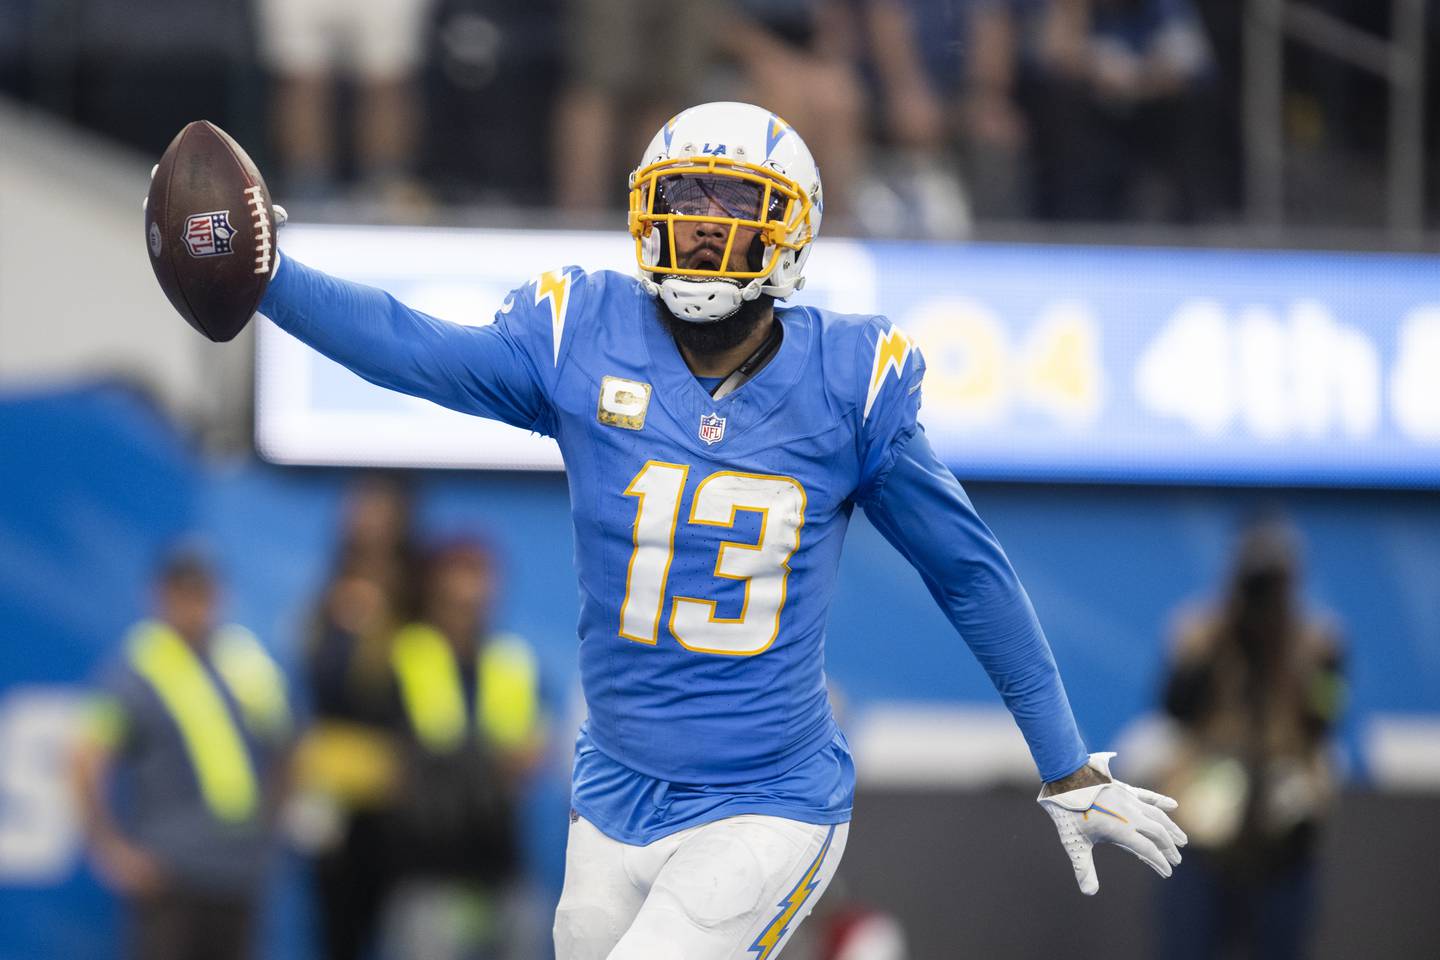 Los Angeles Chargers wide receiver Keenan Allen reacts on his touchdown against the Detroit Lions, Sunday, Nov. 12, 2023, in Inglewood, Calif.